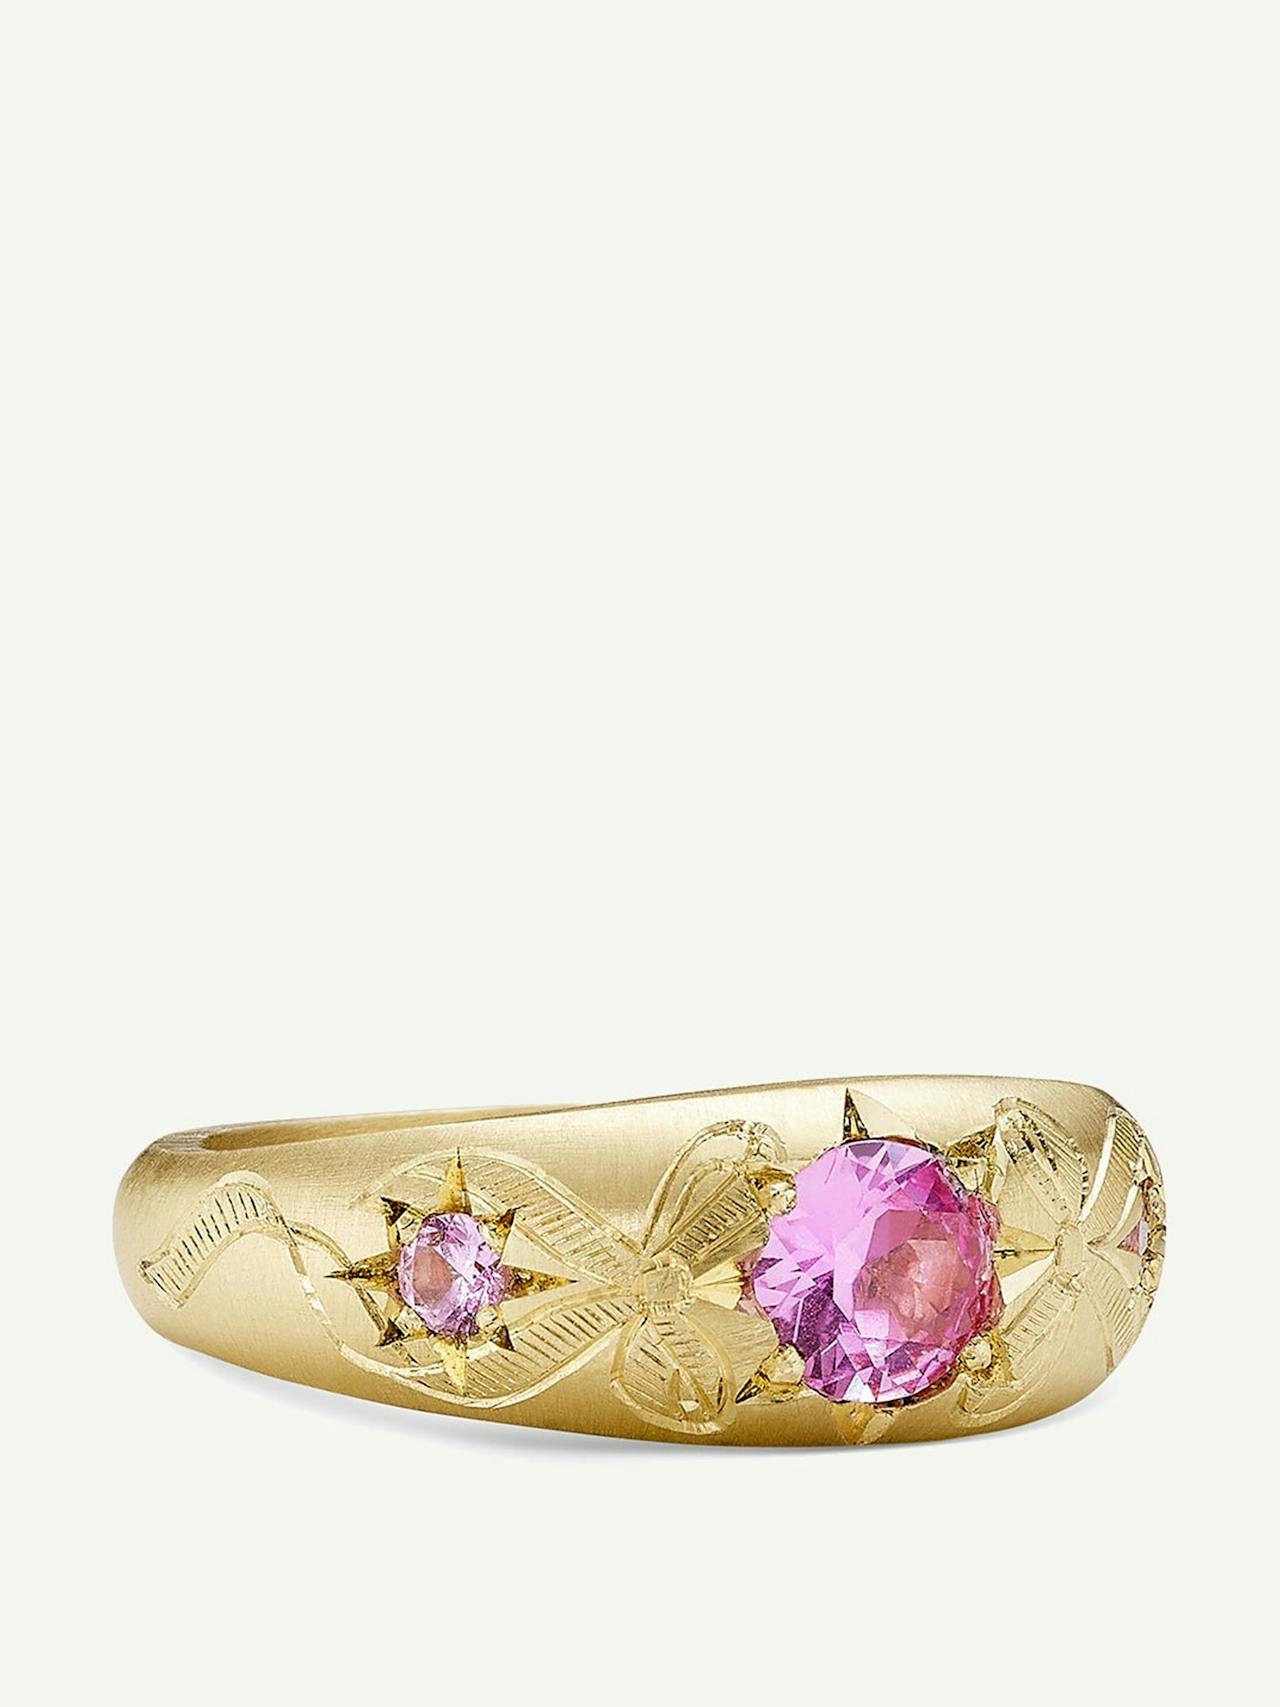 18kt gold and pink sapphire Lover's Bow ring